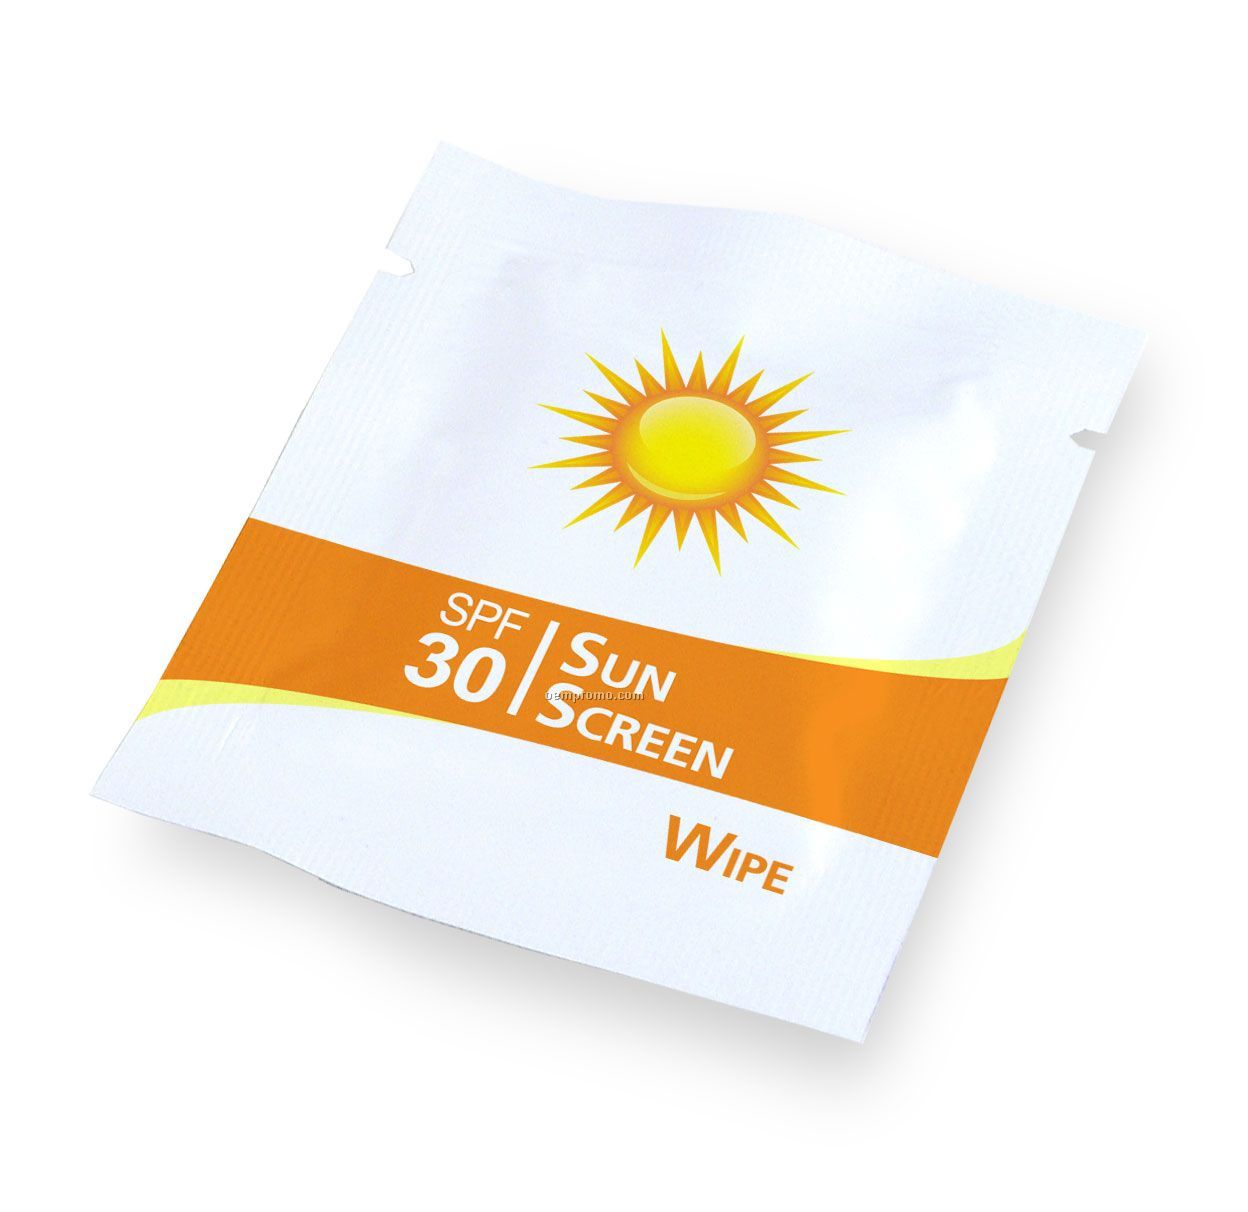 Spf 30, Lotion Packette, Stock Imprint